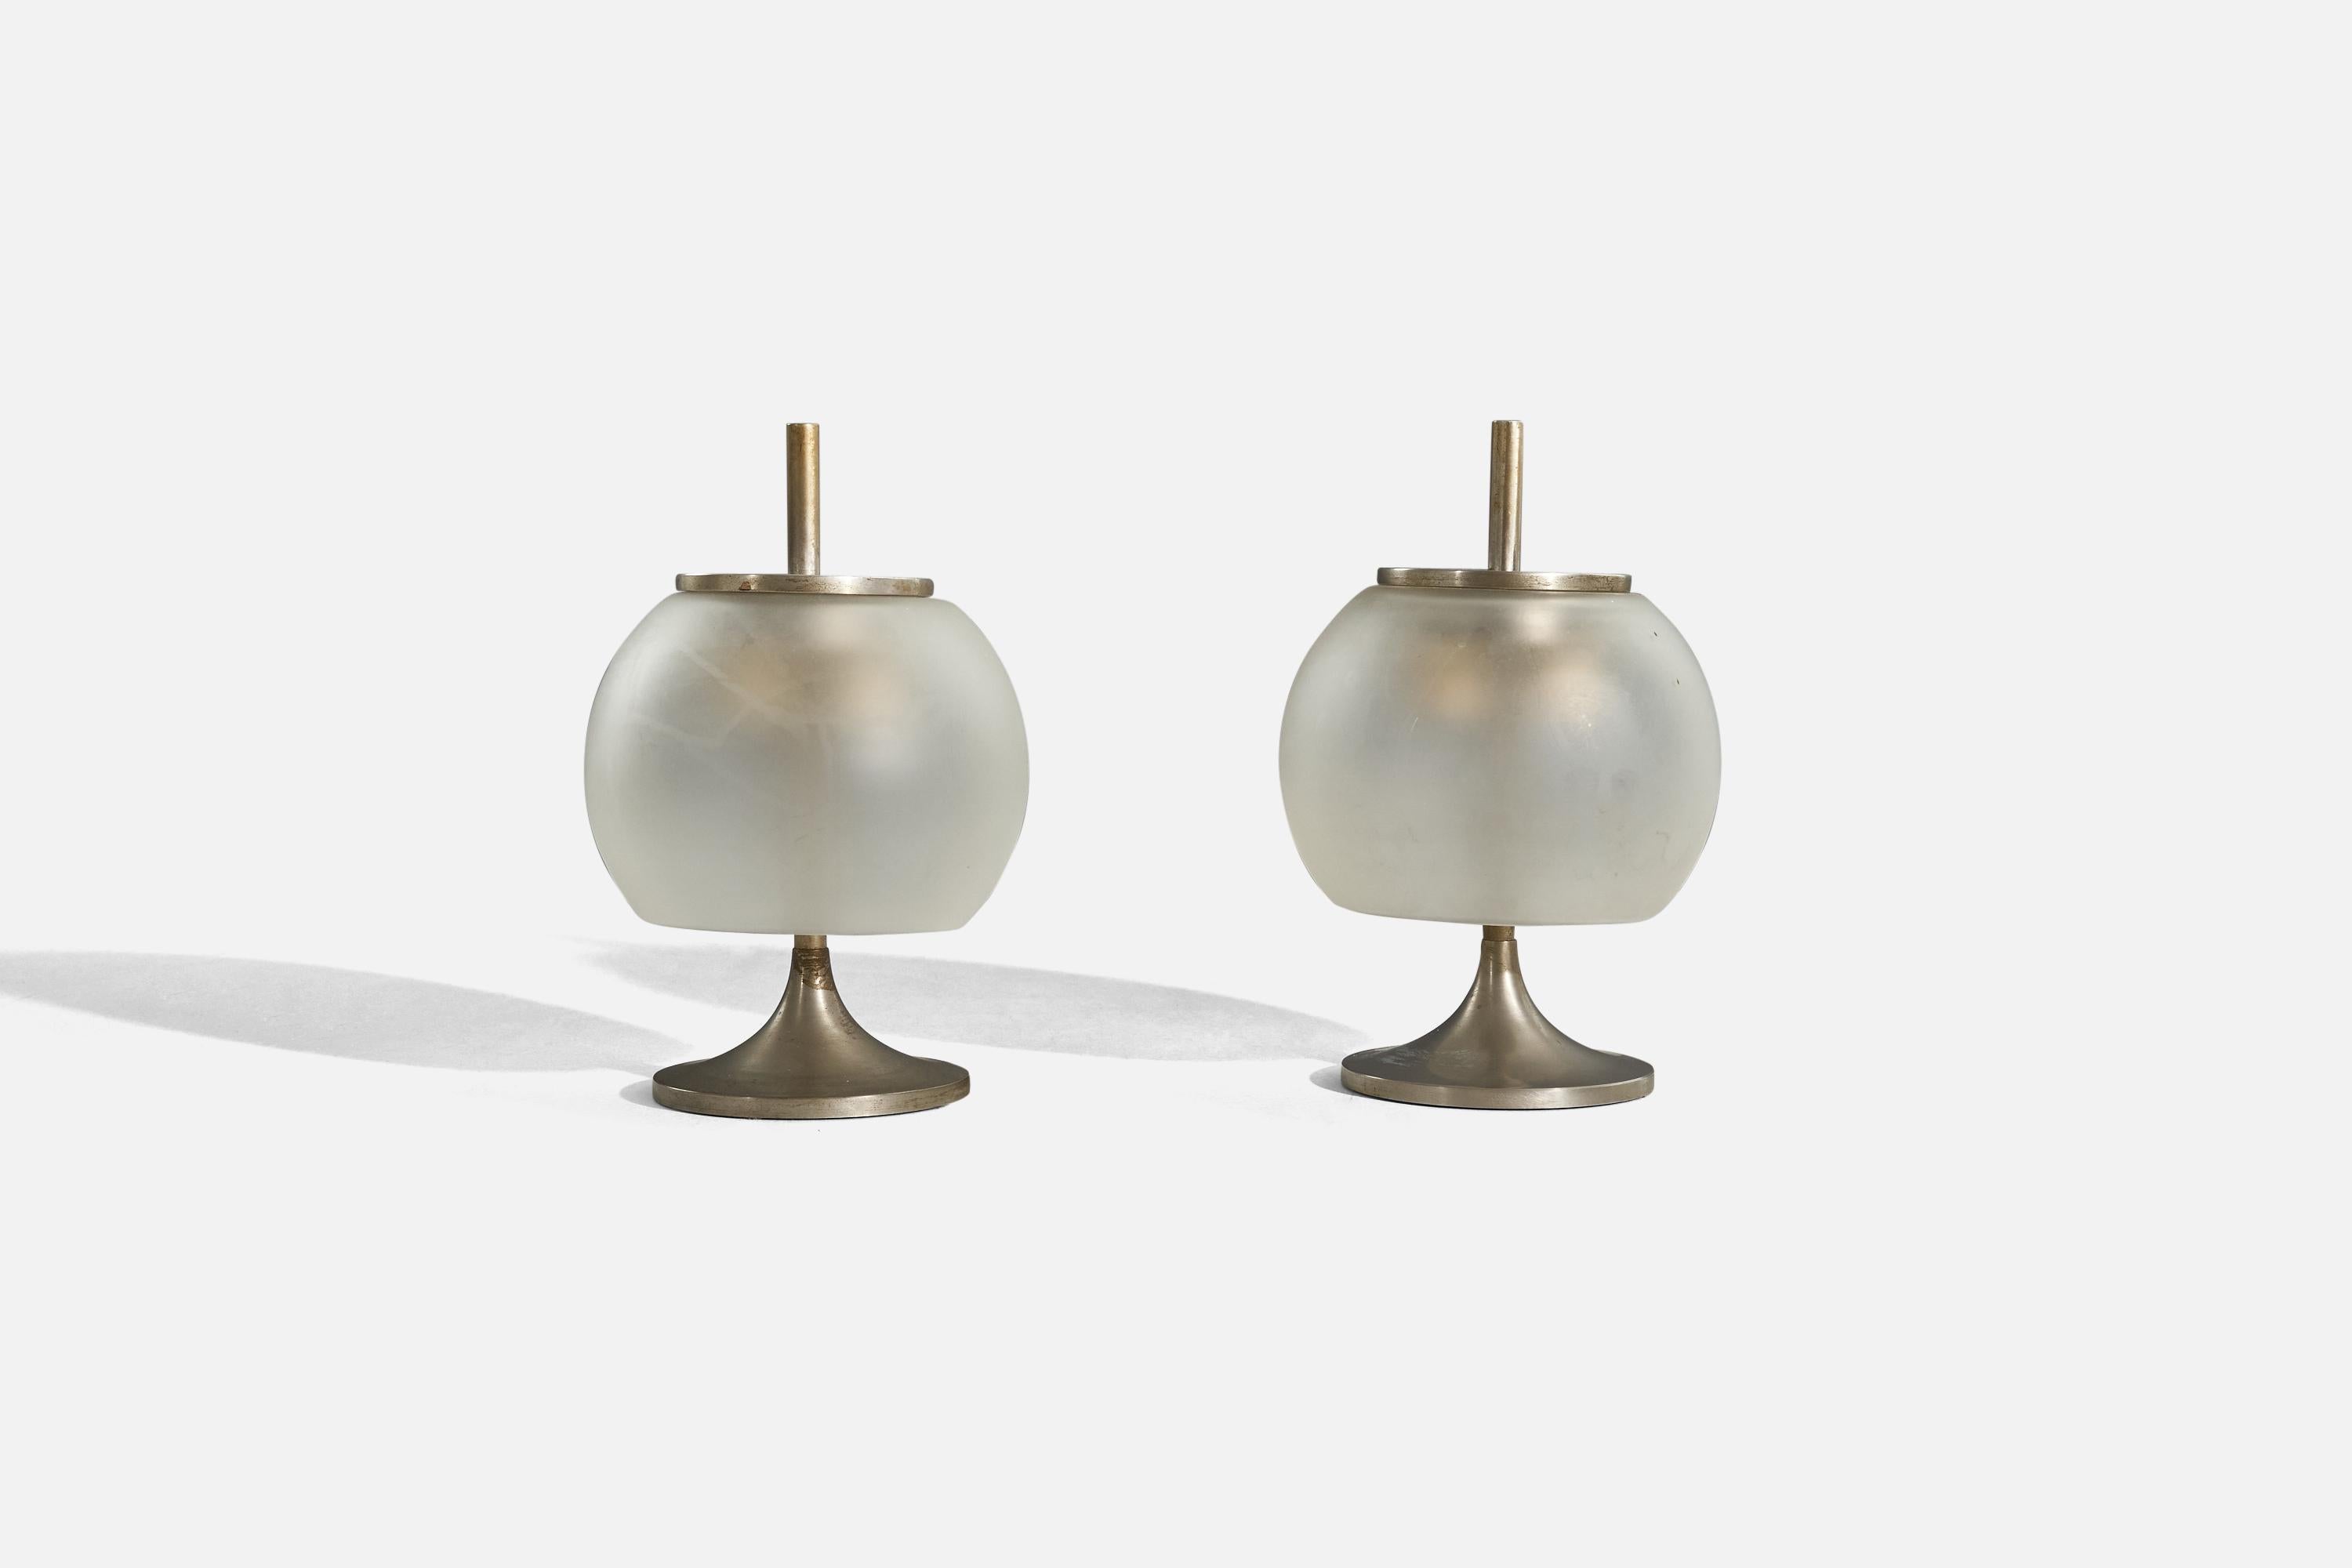 A pair of steel and glass table lamps designed by Sergio Mazza and produced by Artemide, Italy, c. 1950s.

